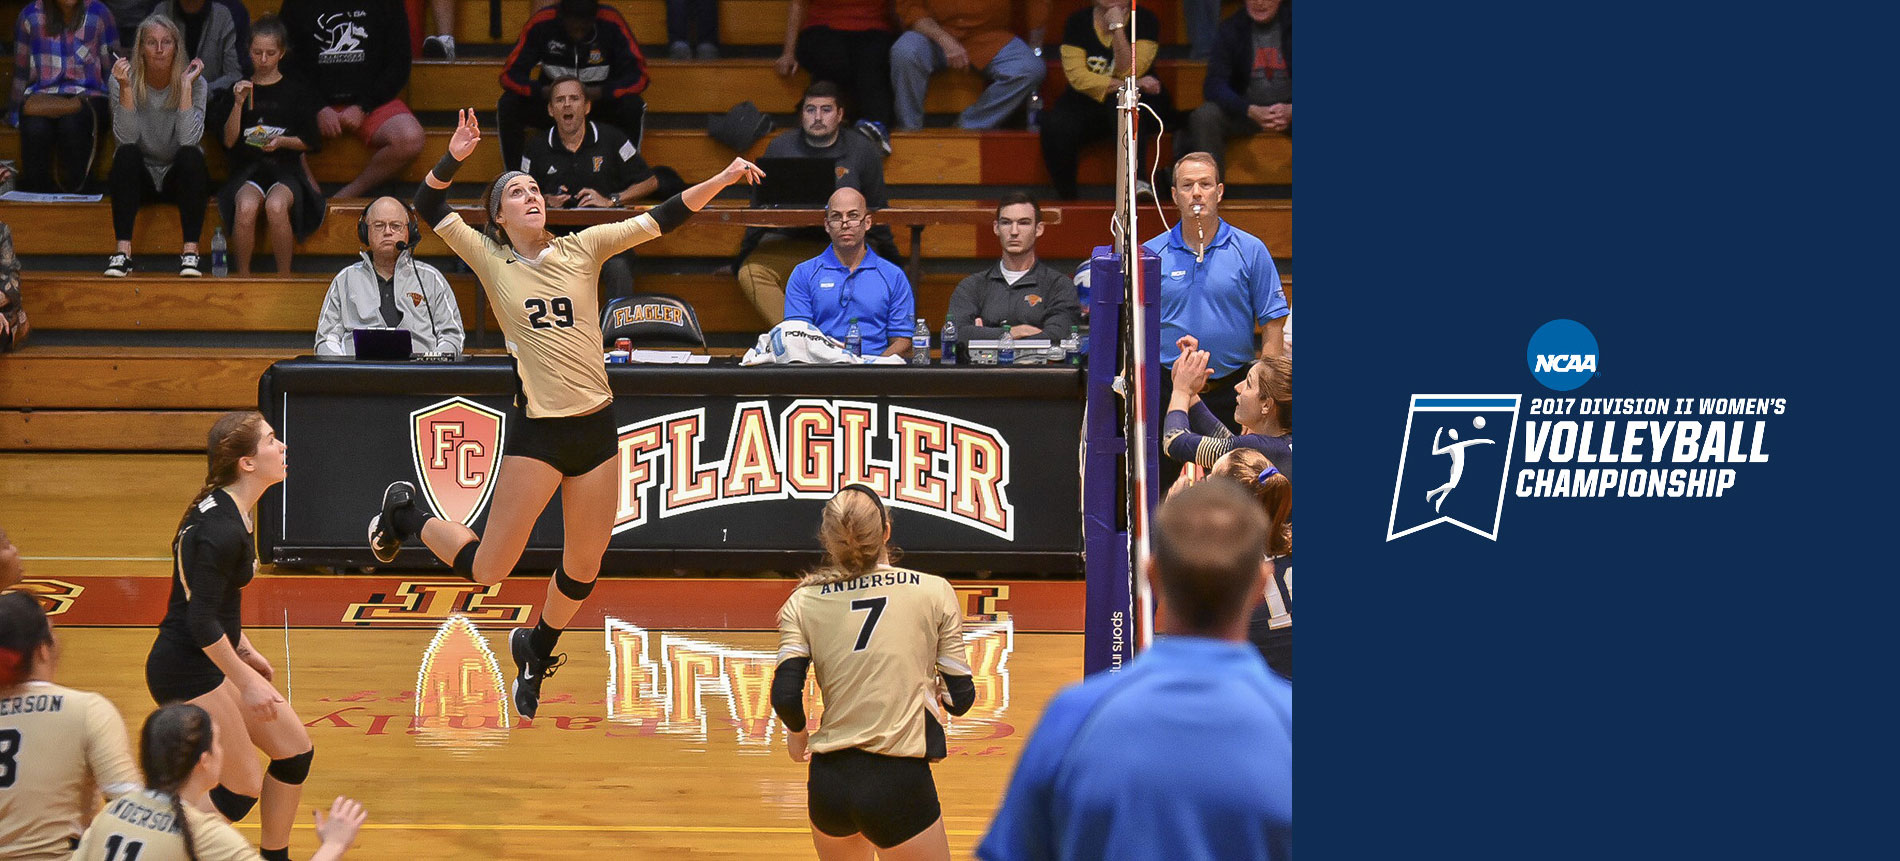 Top-Seeded Flagler Outlasts No. 4 Seeded Trojans in NCAA Regional Semifinals